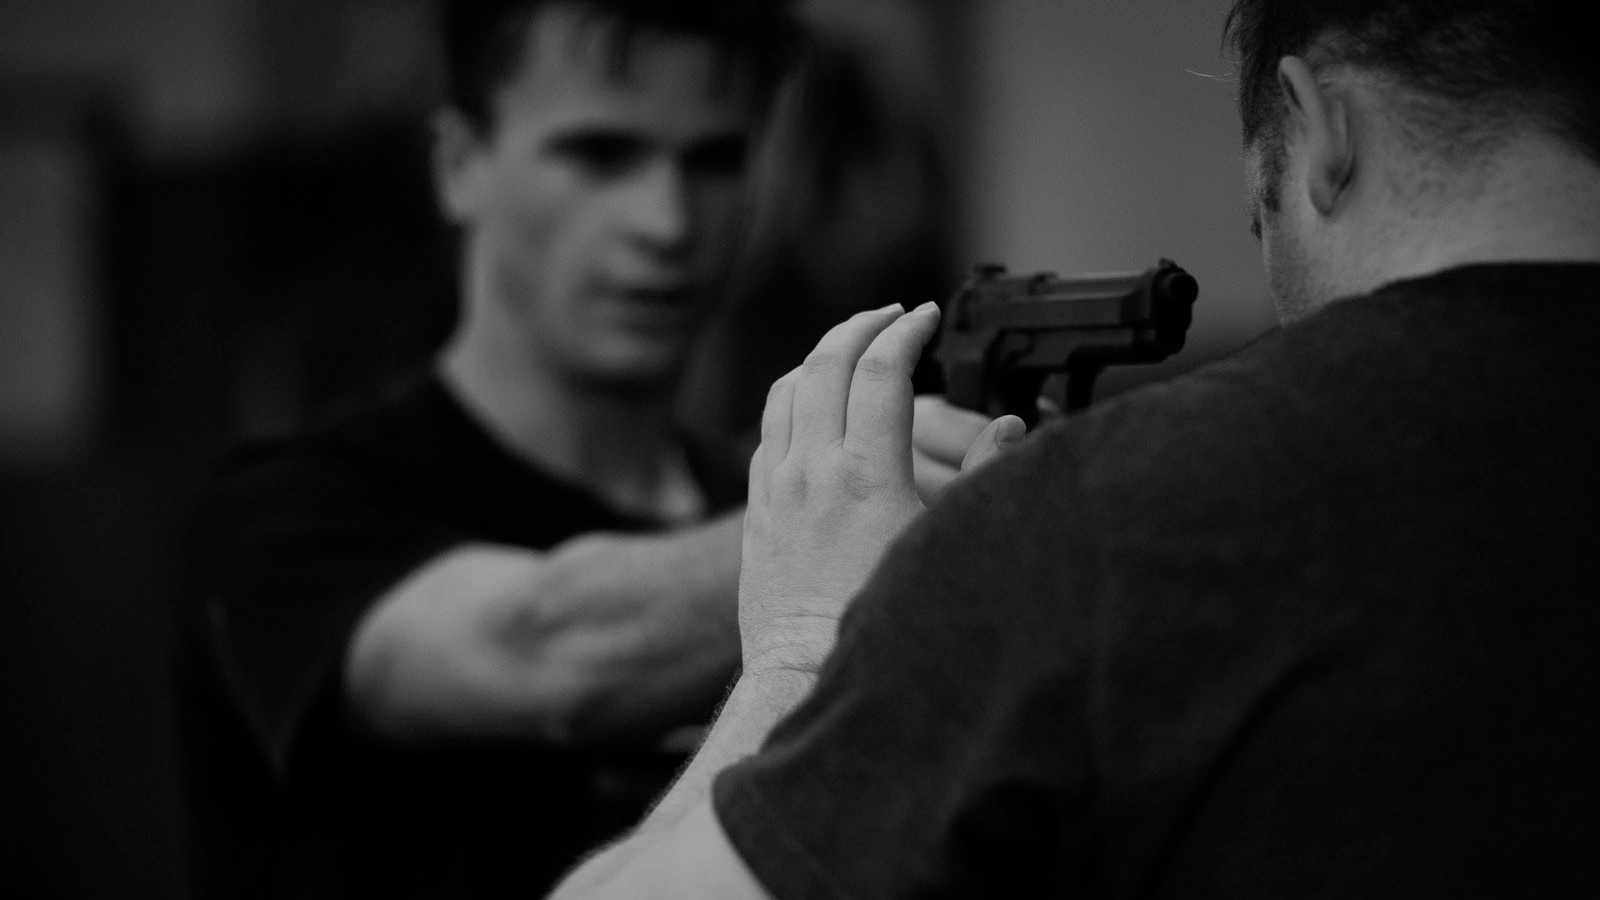 Training demo of being held up with a gun